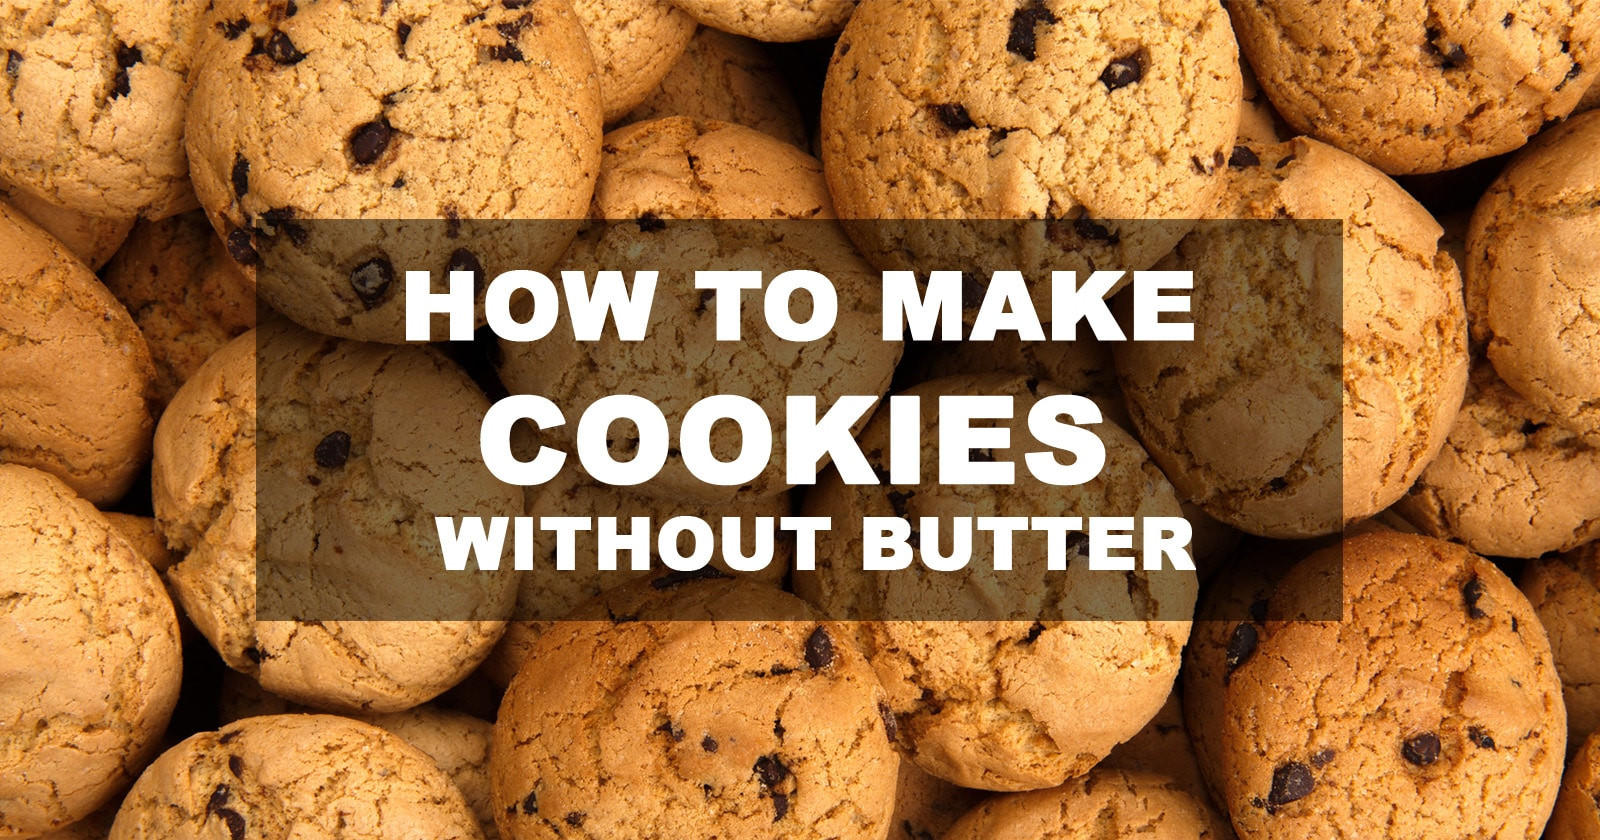 Cookies Without Butter
 How to Make Cookies Without Butter FamilyNano